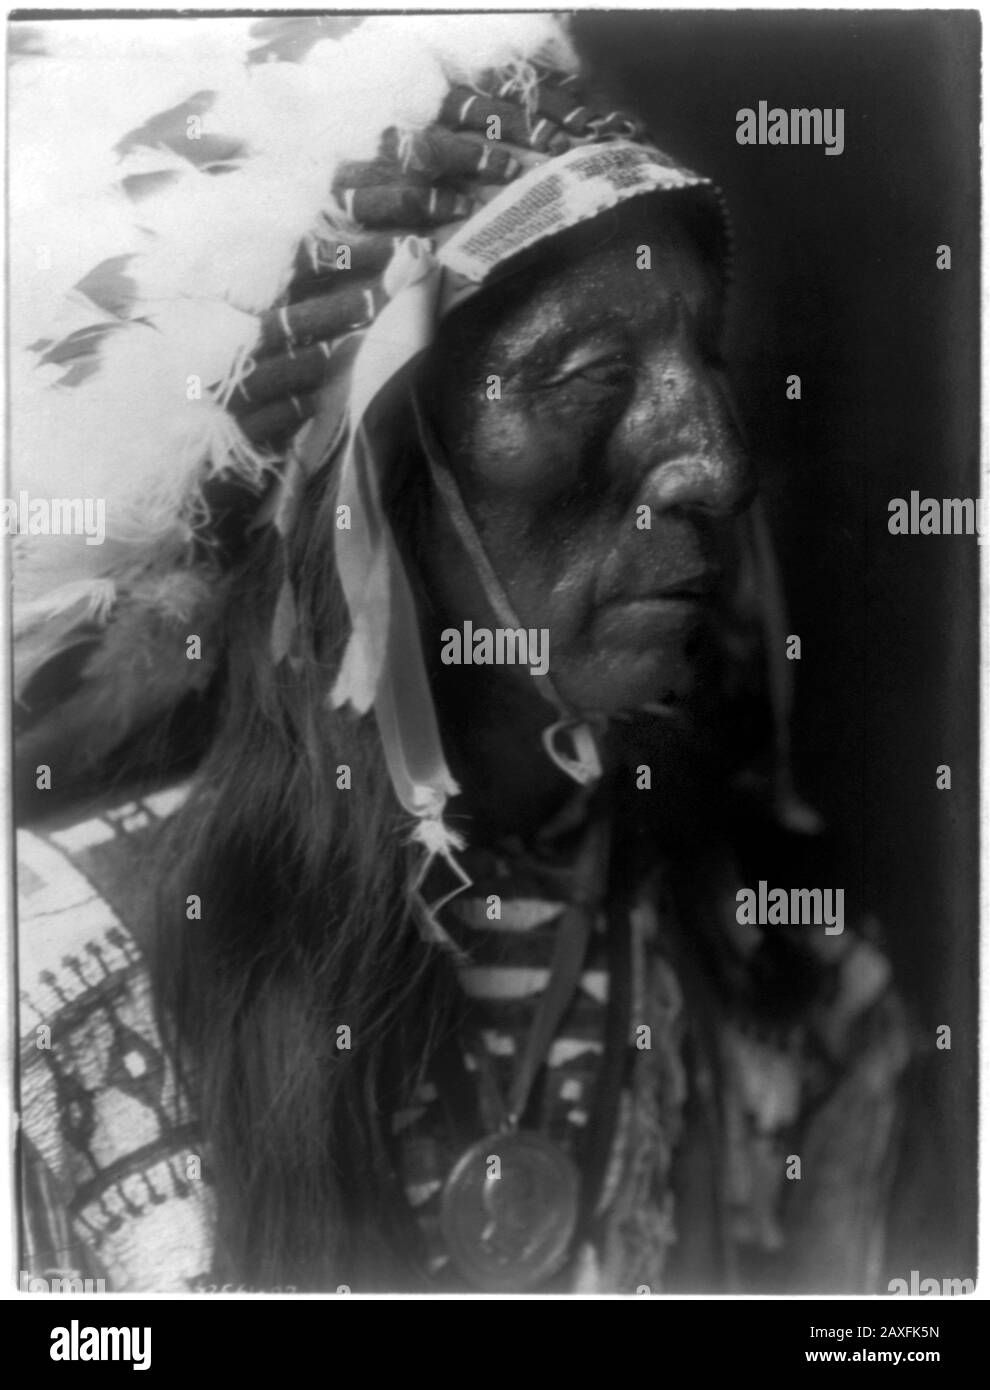 1907, USA :  Native American CHIEF  Jack Red Cloud of Oglala Lakota ( Sioux ) ( 1822 –  1909 ) . Photo by Edward S. CURTIS ( 1868 - 1952 ). - CAPO NUVOLA ROSSA - The North American Indian - HISTORY - foto storiche - warbonnet  - foto storica  -  Indians - INDIANI D' AMERICA - PELLEROSSA - natives americans  - Indians of North America - CAPO TRIBU' INDIANO - GUERRIERO - WARRIOR - portrait - ritratto  - SELVAGGIO WEST - piuma - piume - feathers  - STOCK  © Archivio GBB / Stock Photo